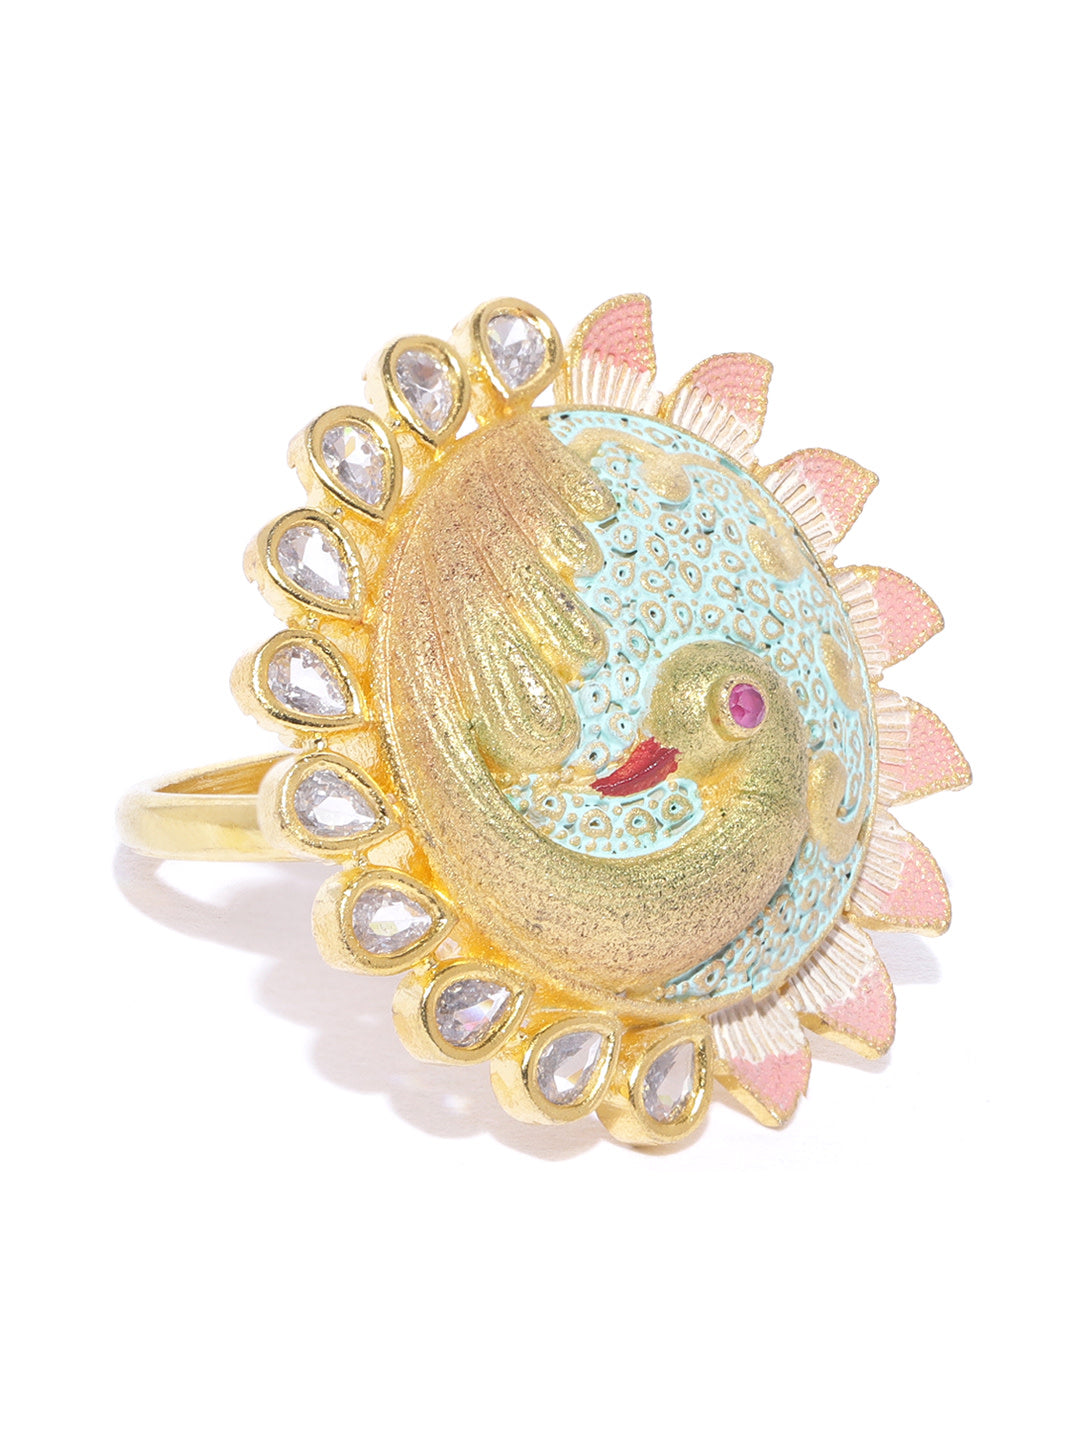 Gold-Plated Stones Studded Peacock Inspired Adjustable Meenakari Ring in Green and Pink Color